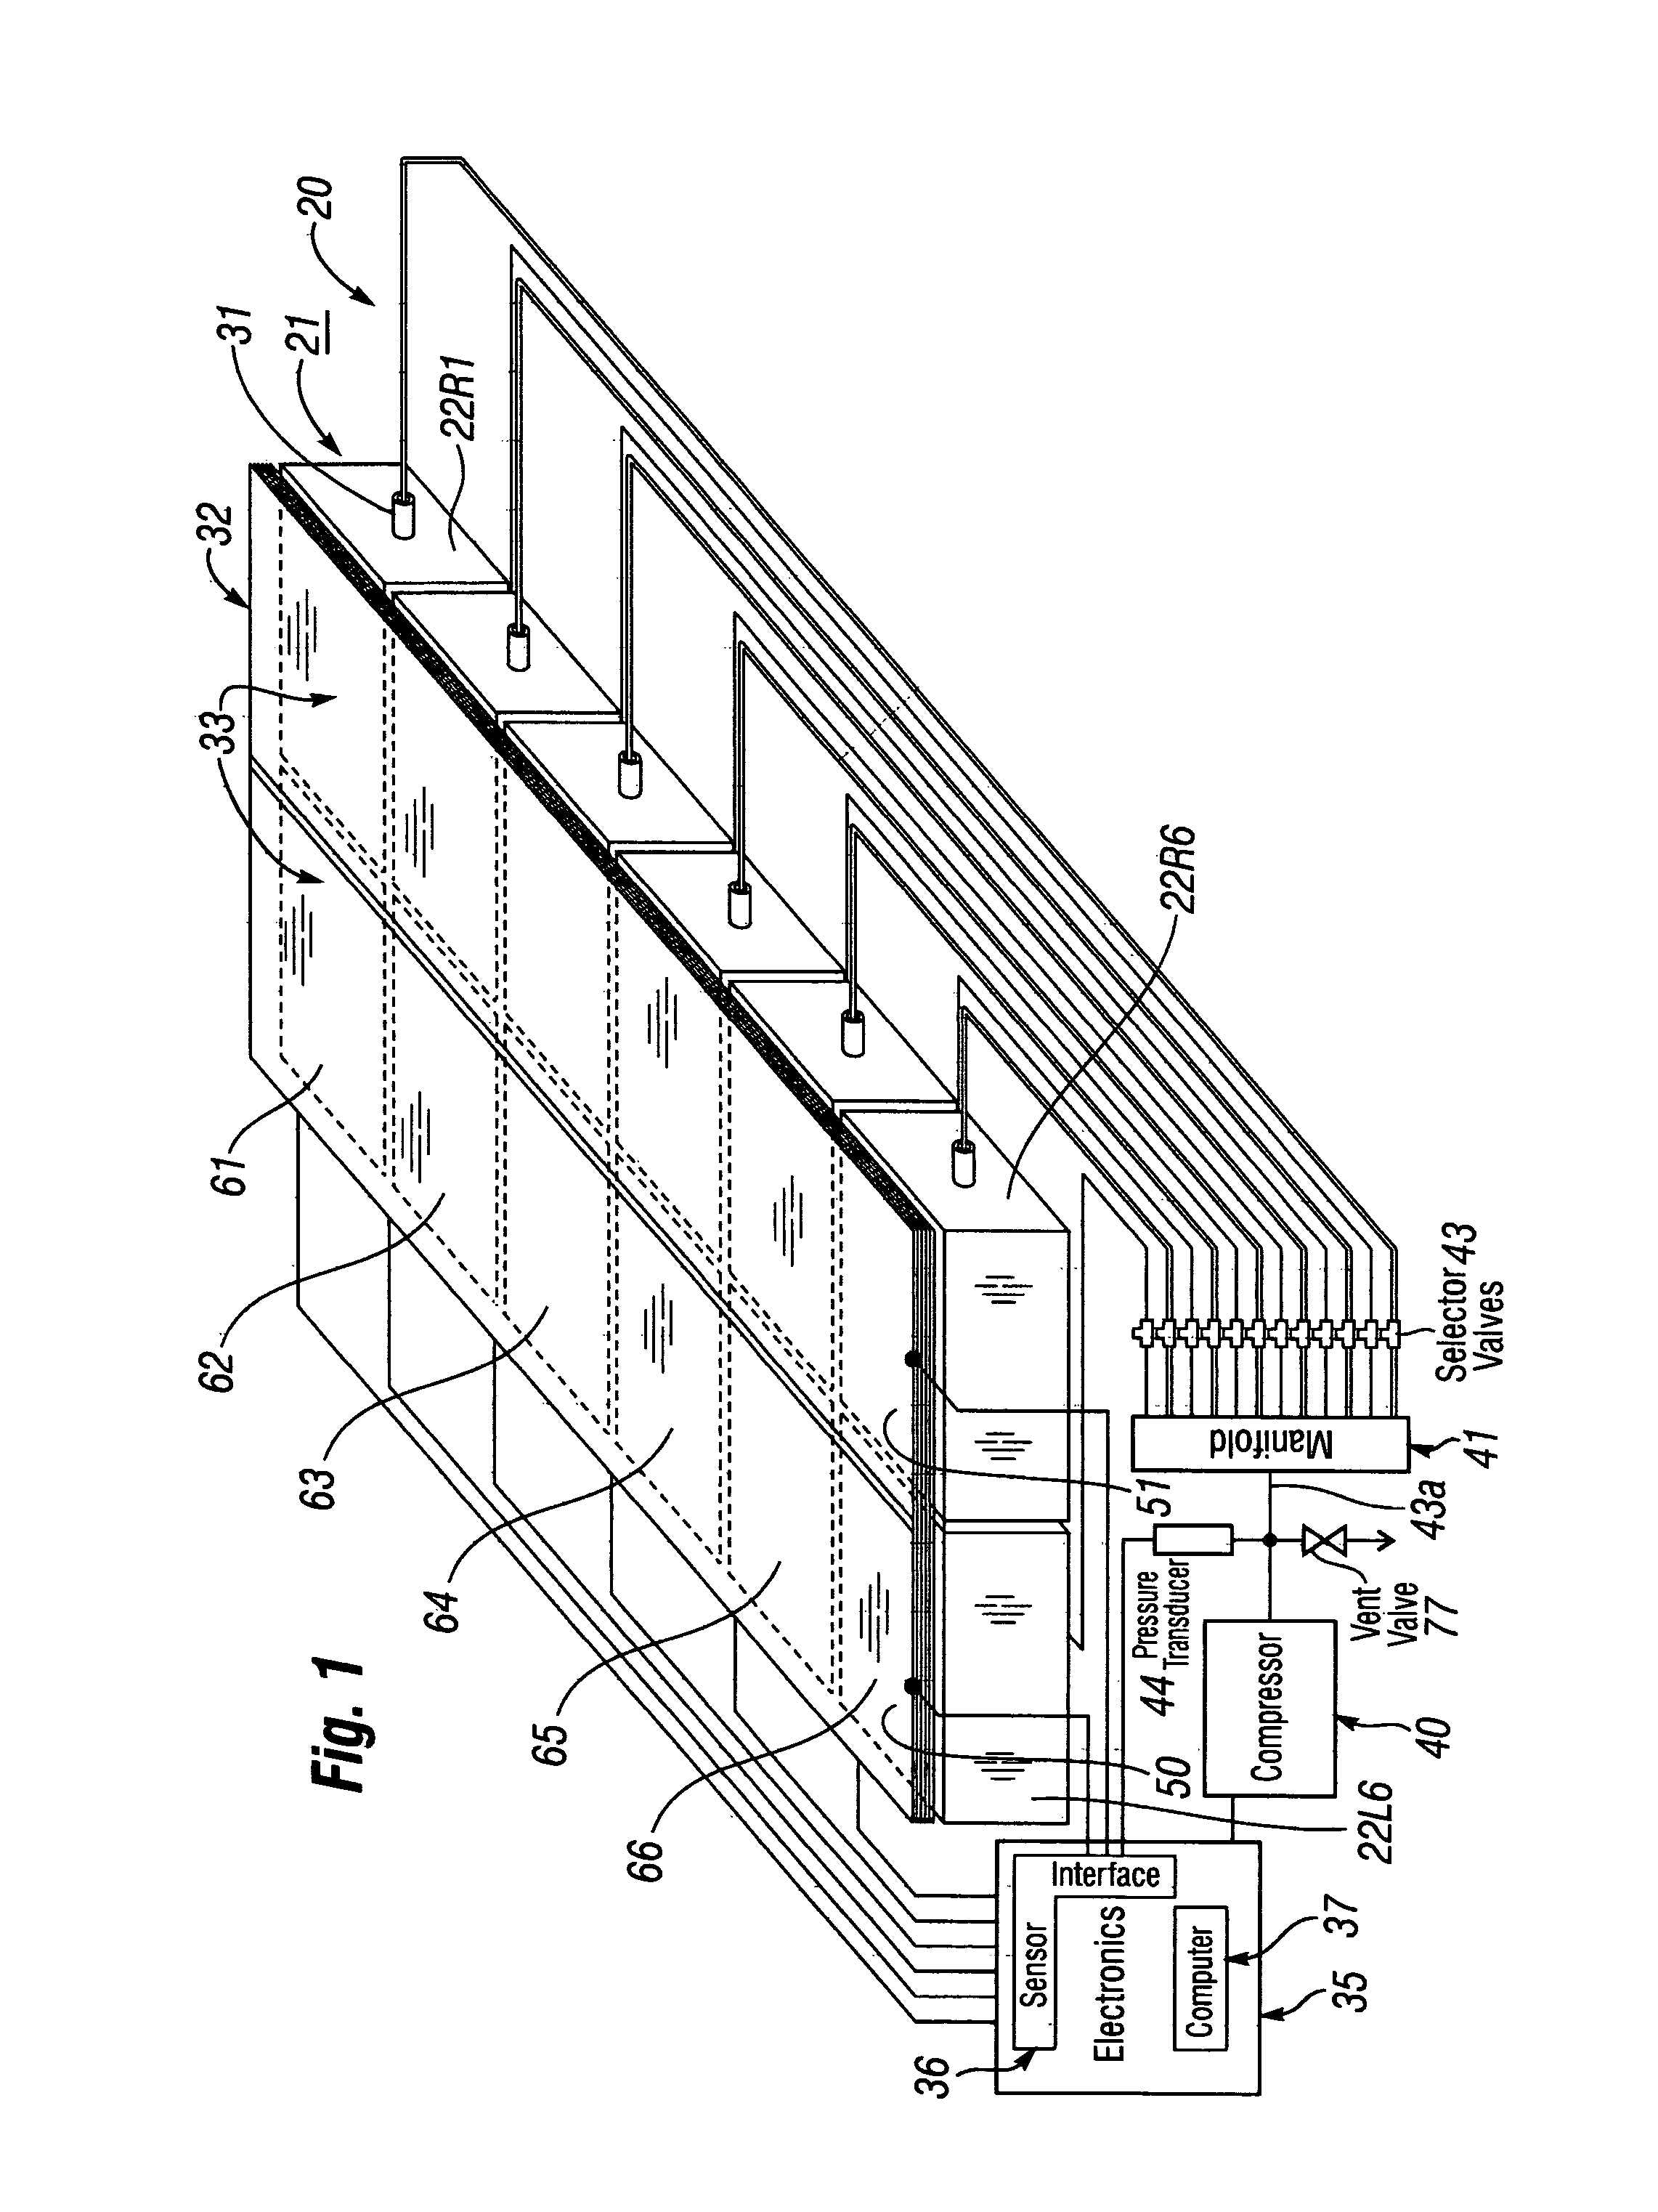 Adaptive cushion method and apparatus for minimizing force concentrations on a human body